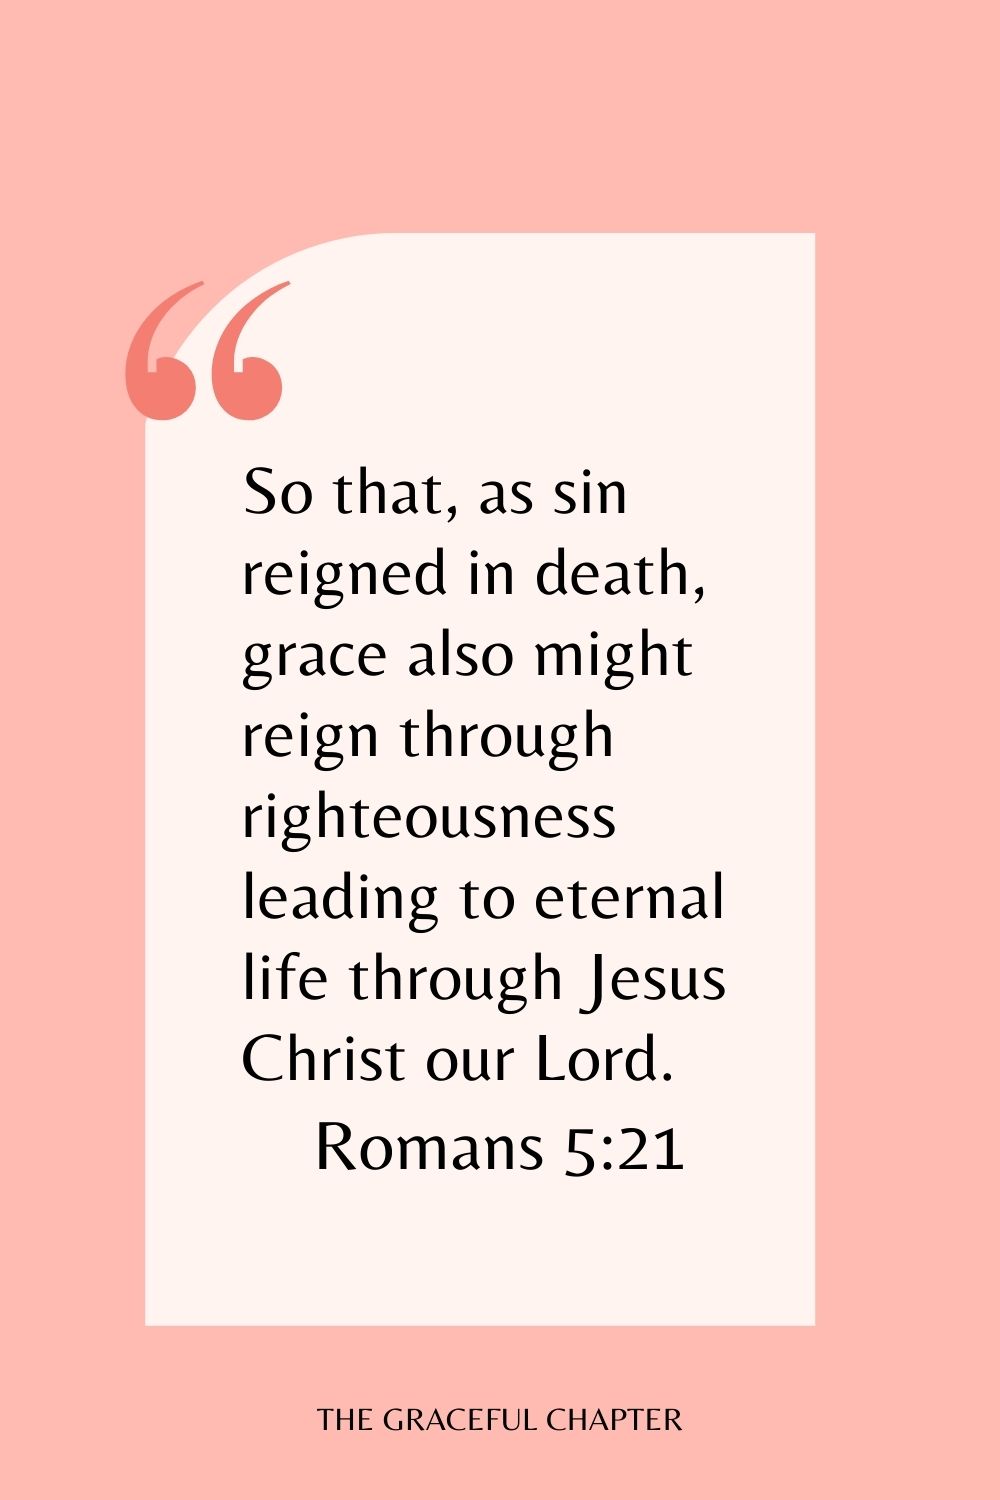 So that, as sin reigned in death, grace also might reign through righteousness leading to eternal life through Jesus Christ our Lord. Romans 5:21